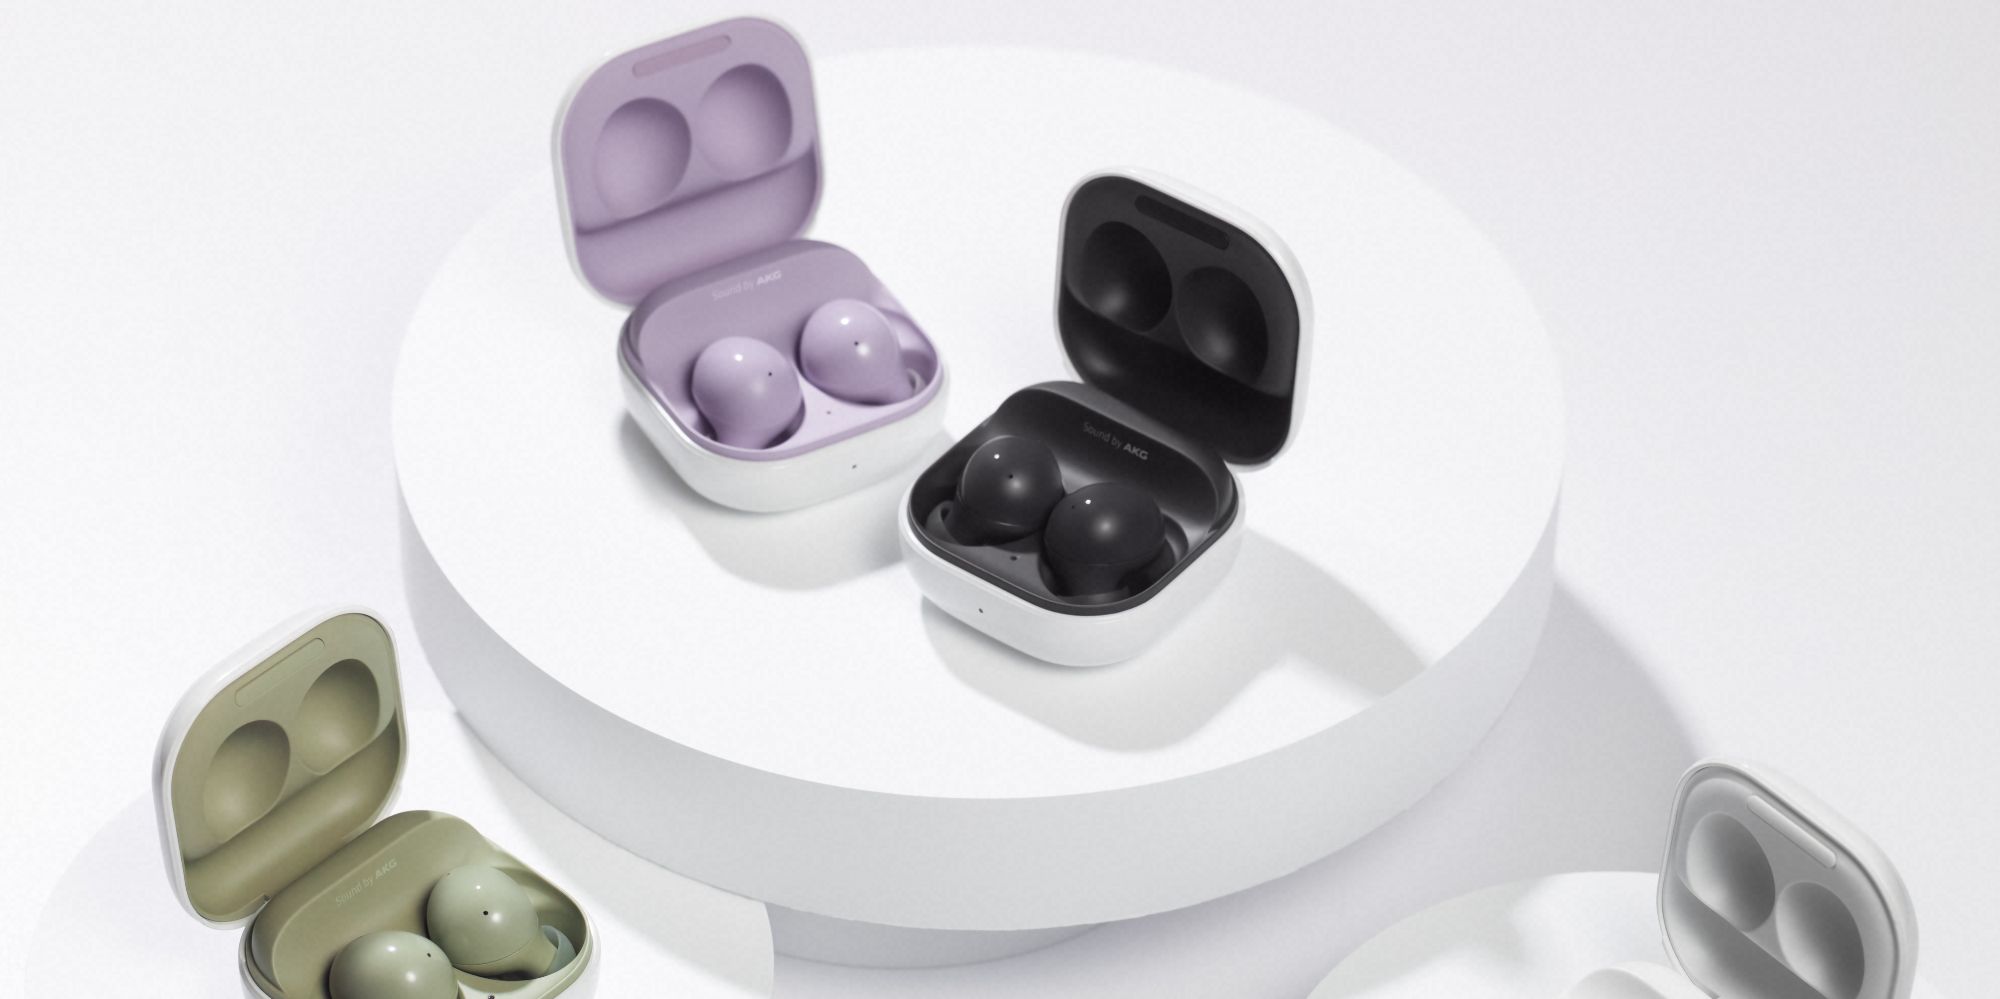 Galaxy Buds 2 Colors Every Style For Samsung’s Earbuds